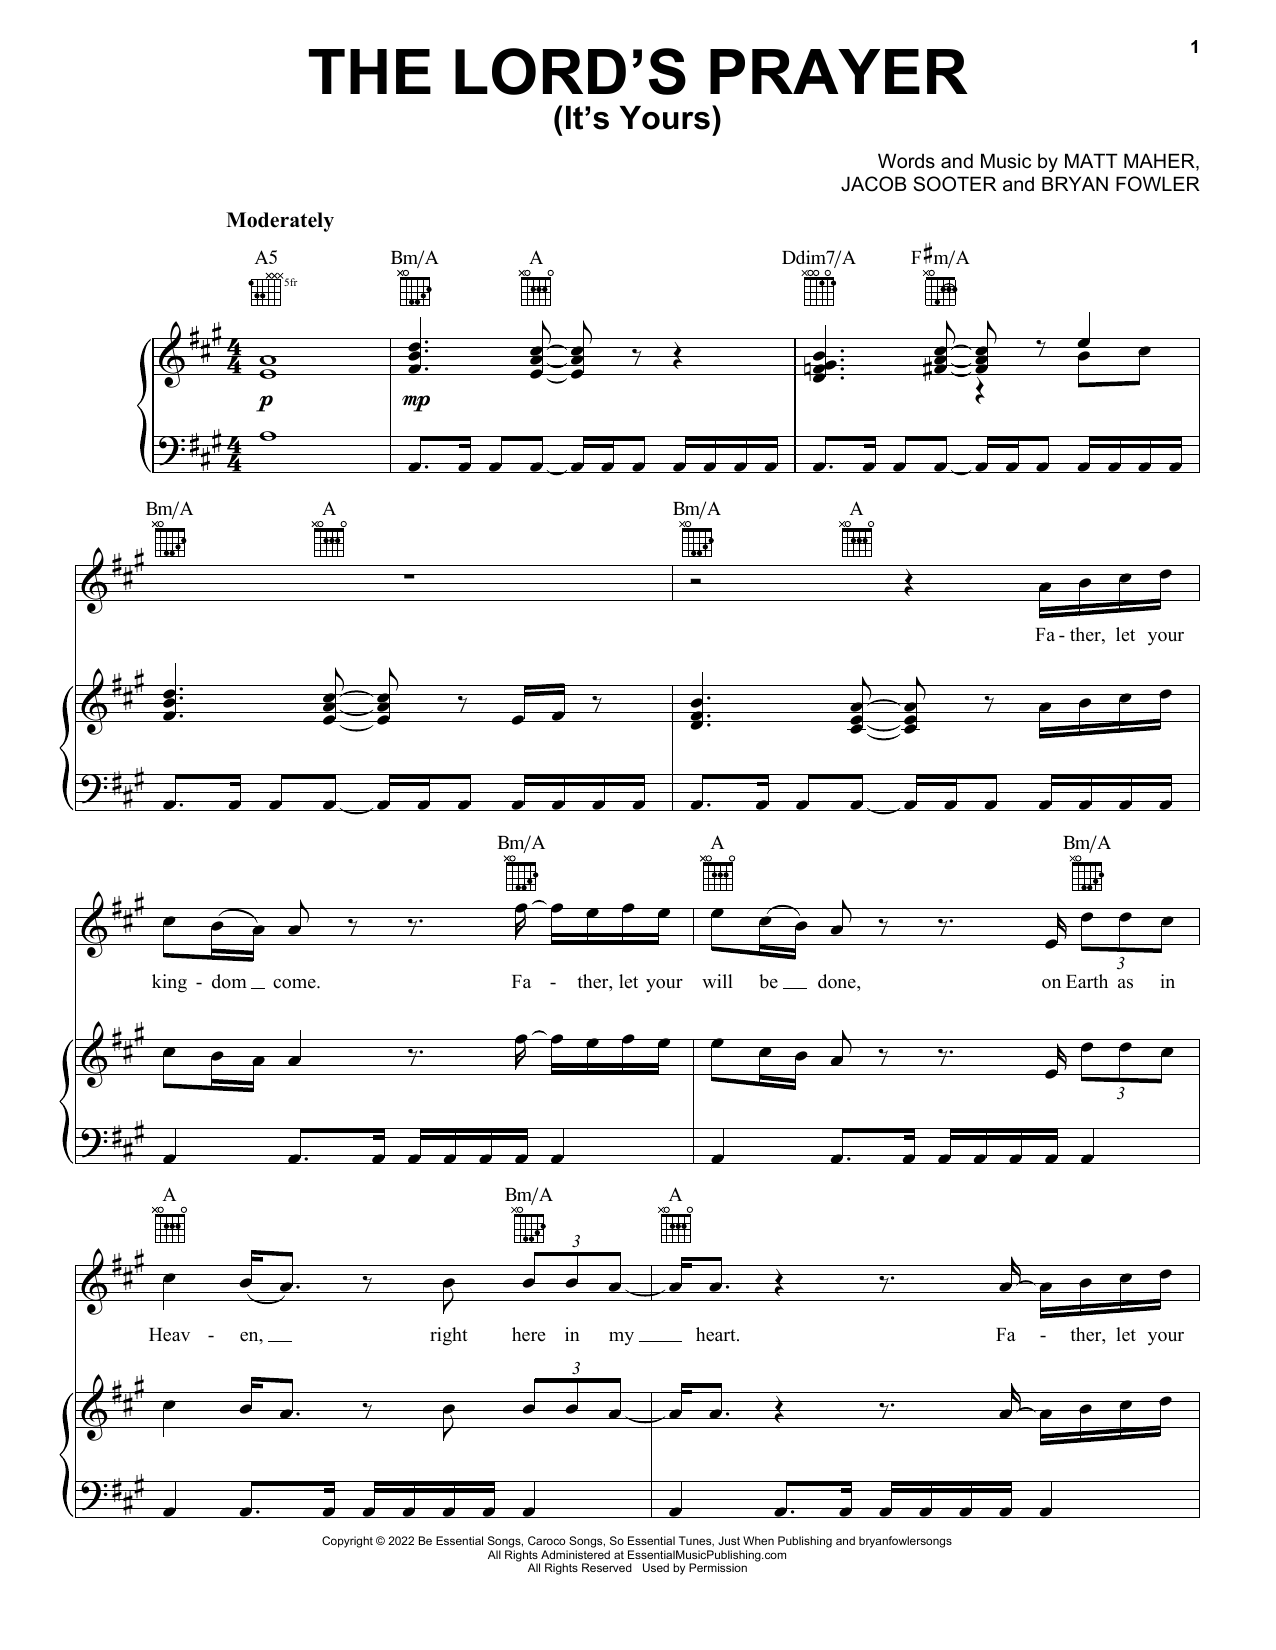 Download Matt Maher The Lord's Prayer (It's Yours) Sheet Music